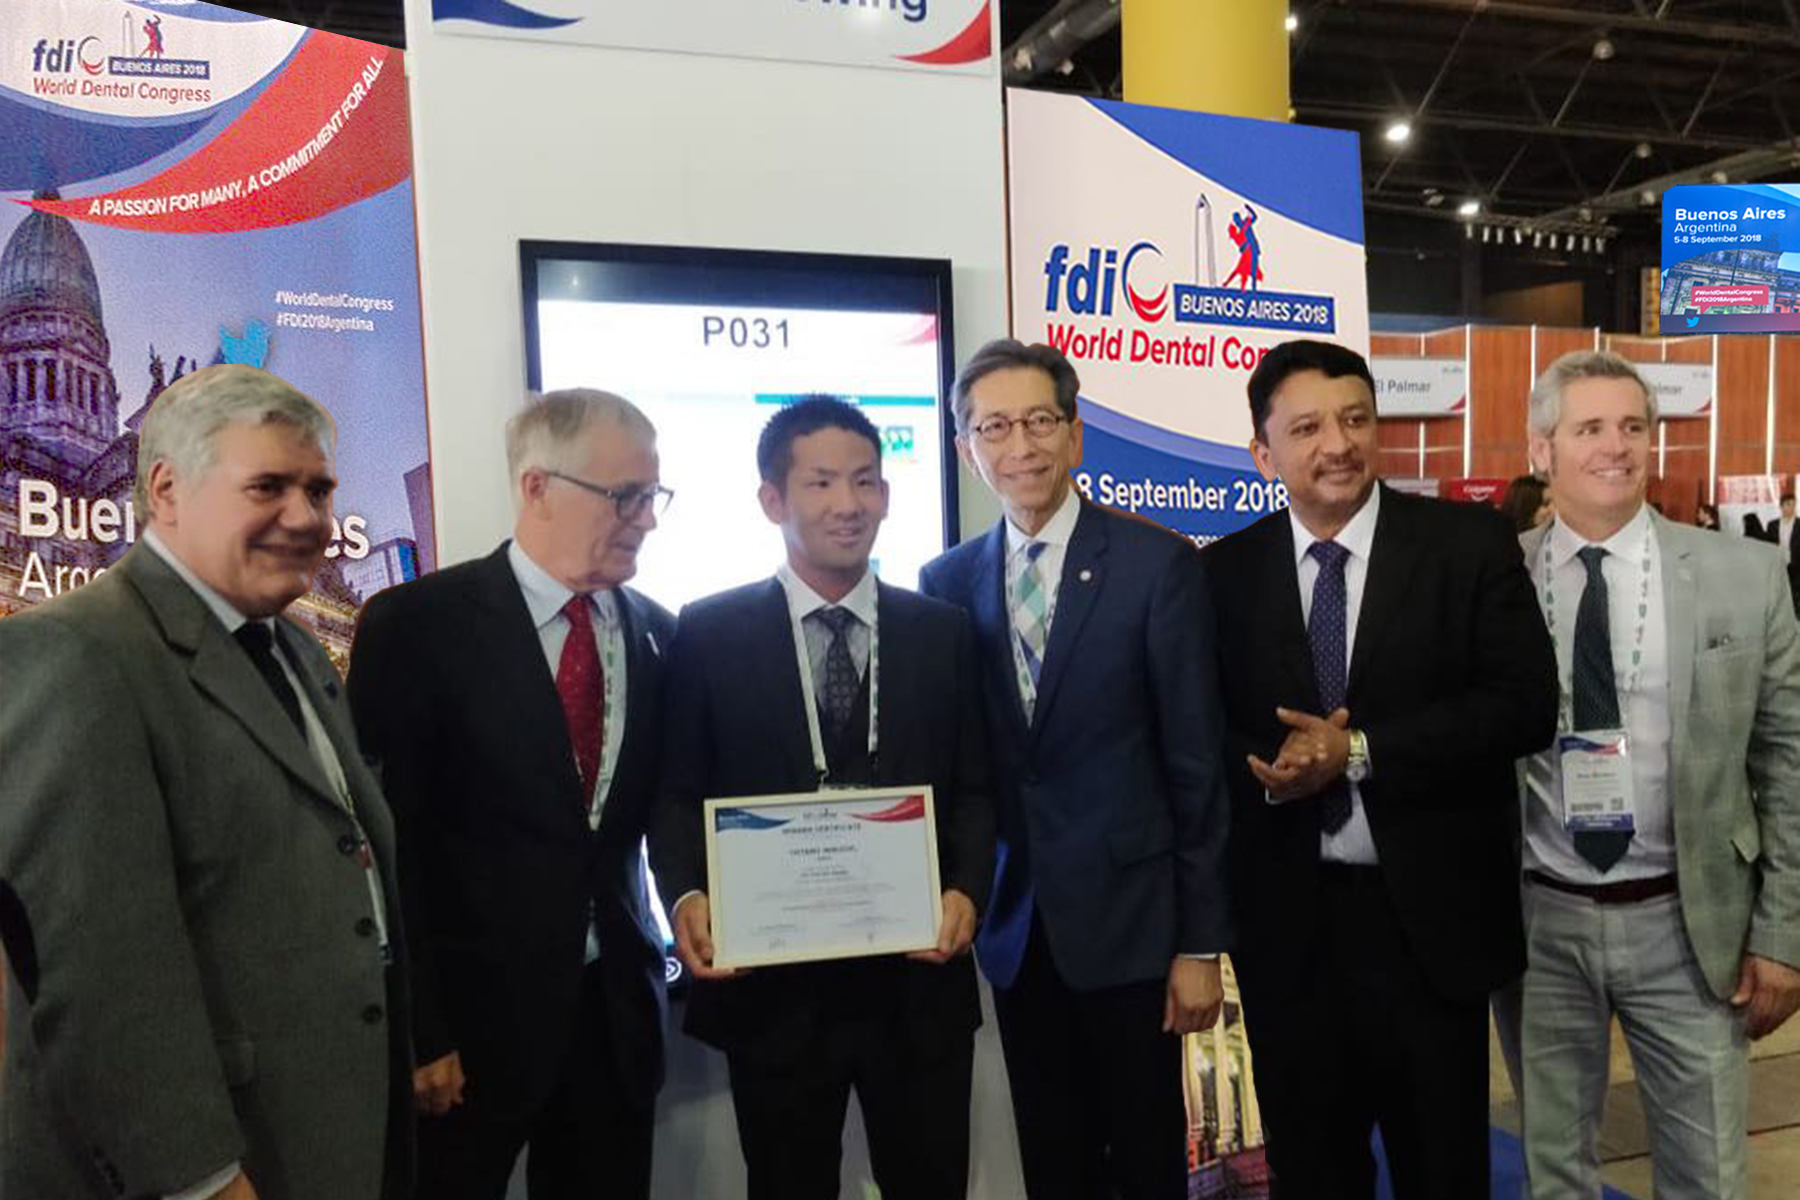 Dr Sm Balaji Hands A Certificate Of Excellence To A Winner. Also Seen Are Dr. Jurgen Fedderwitz, Chair, Education Committee, Fdi, Dr. Guillermo Rivero, Congress President, Dr William Cheung, Member, Education Committee And Dr Brian Murdoch, Member, Scientific Committee